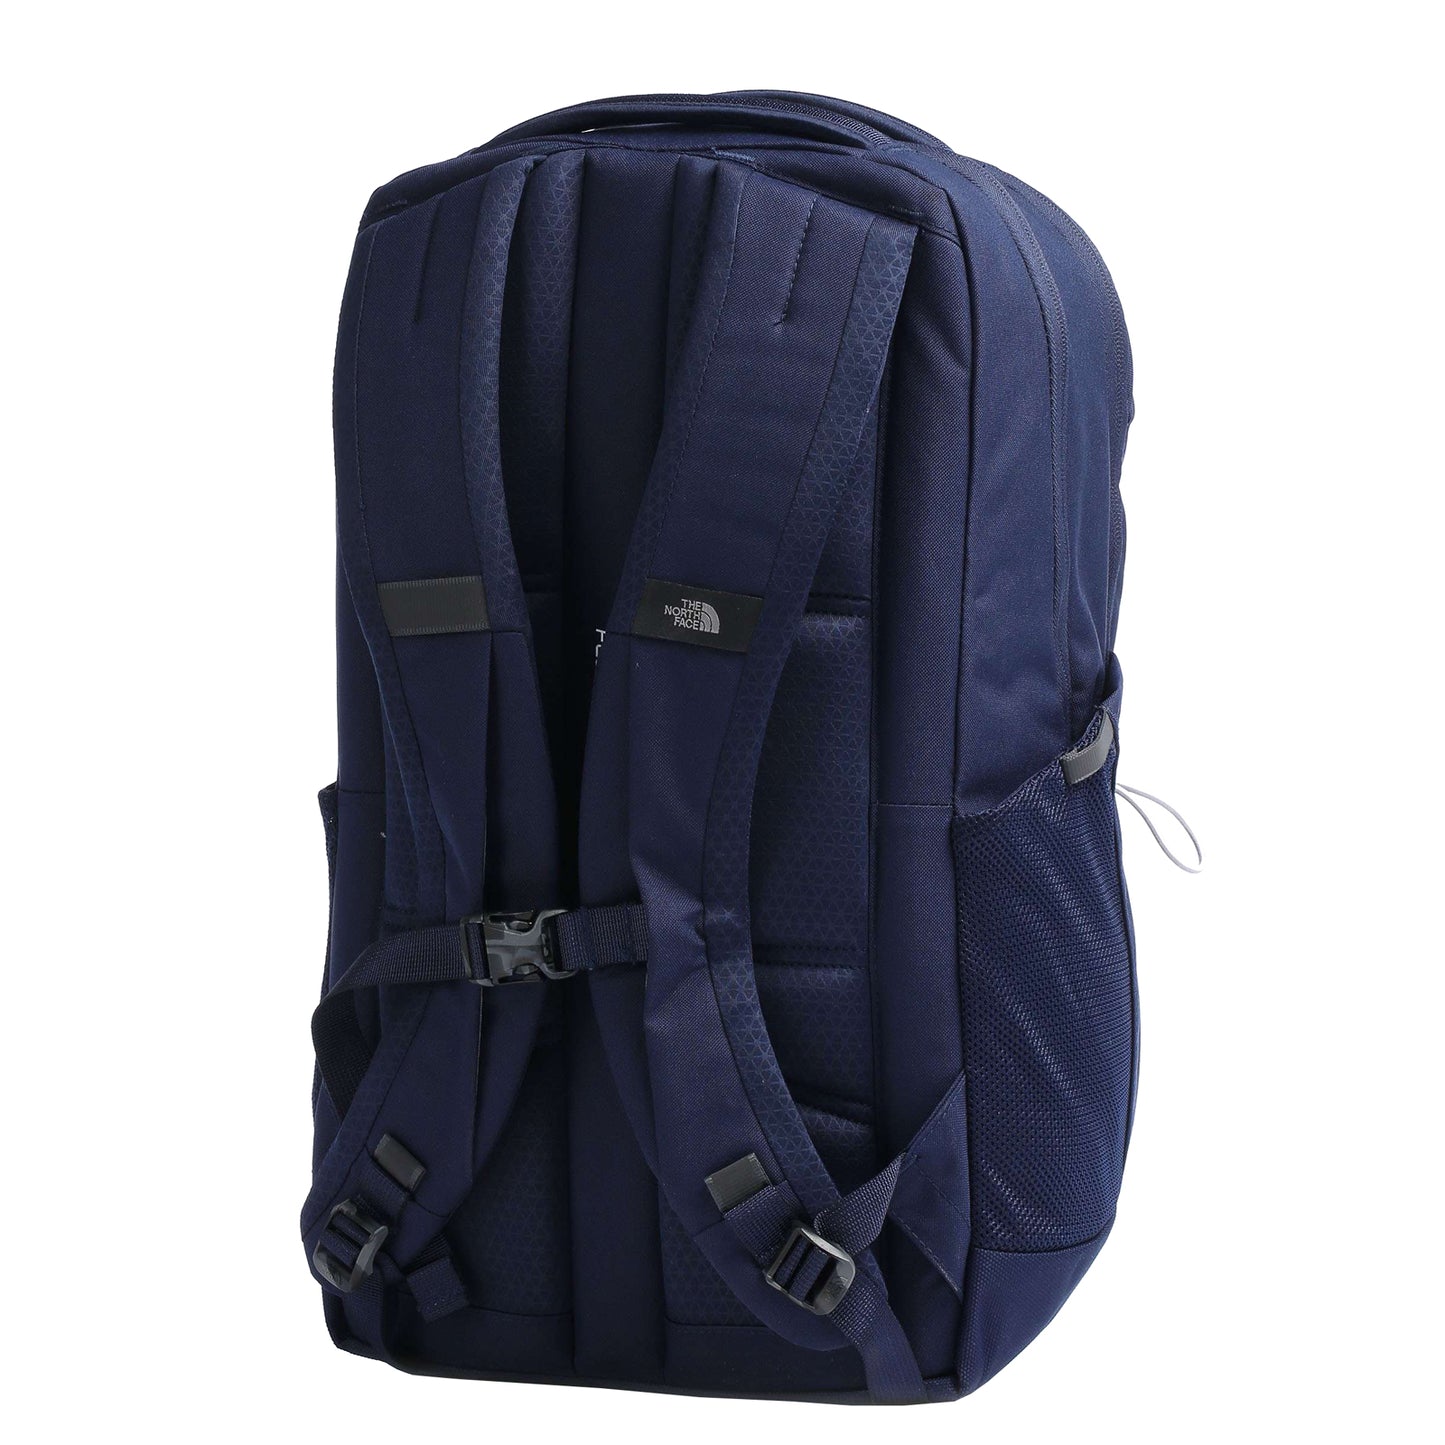 The North Face Jester Backpack TNF Navy/Meld Gray